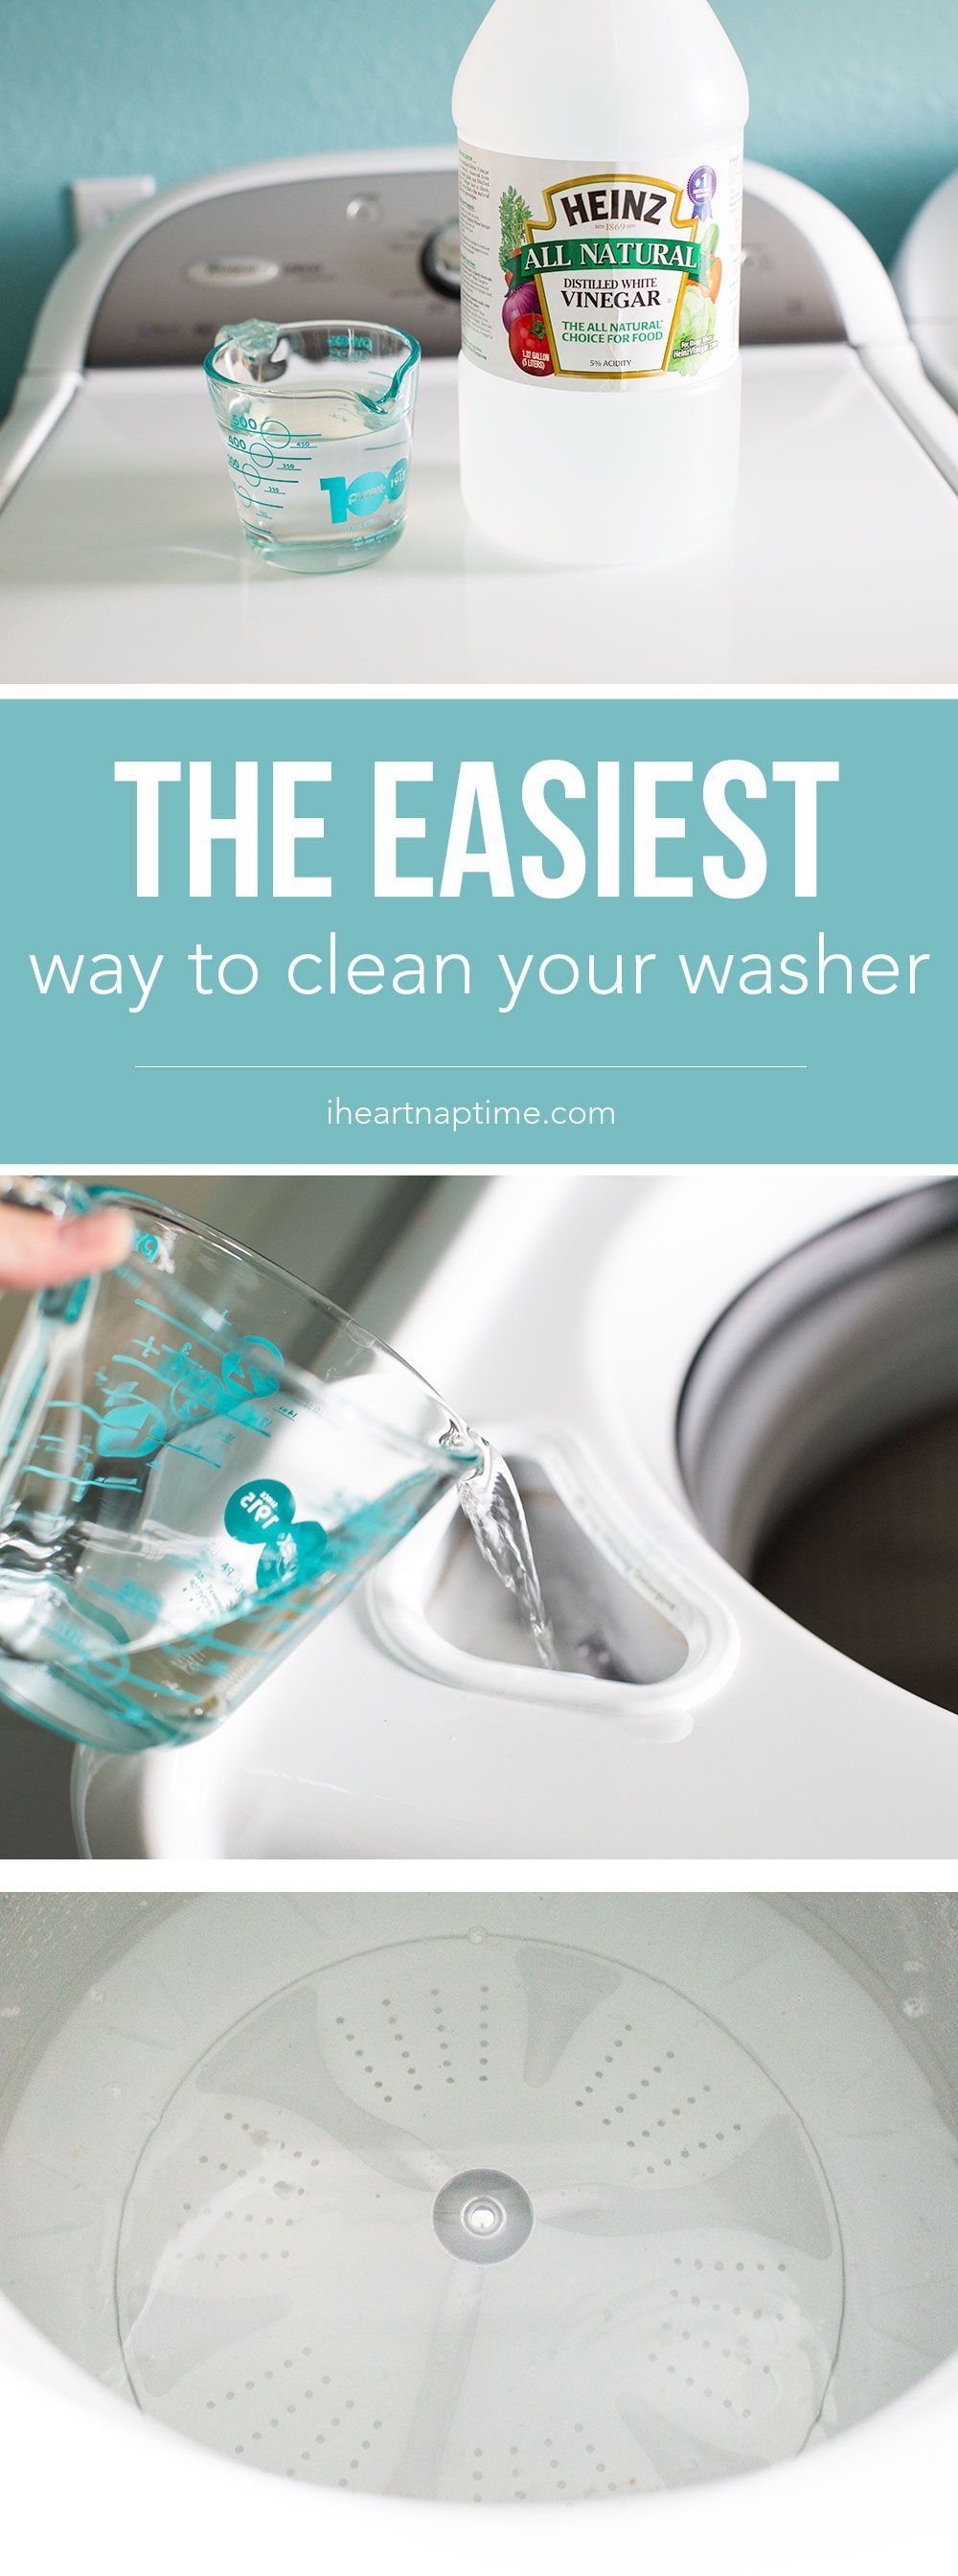 Here is the easiest way to clean your washer …all it takes is ONE ingredient and a few minutes to leave